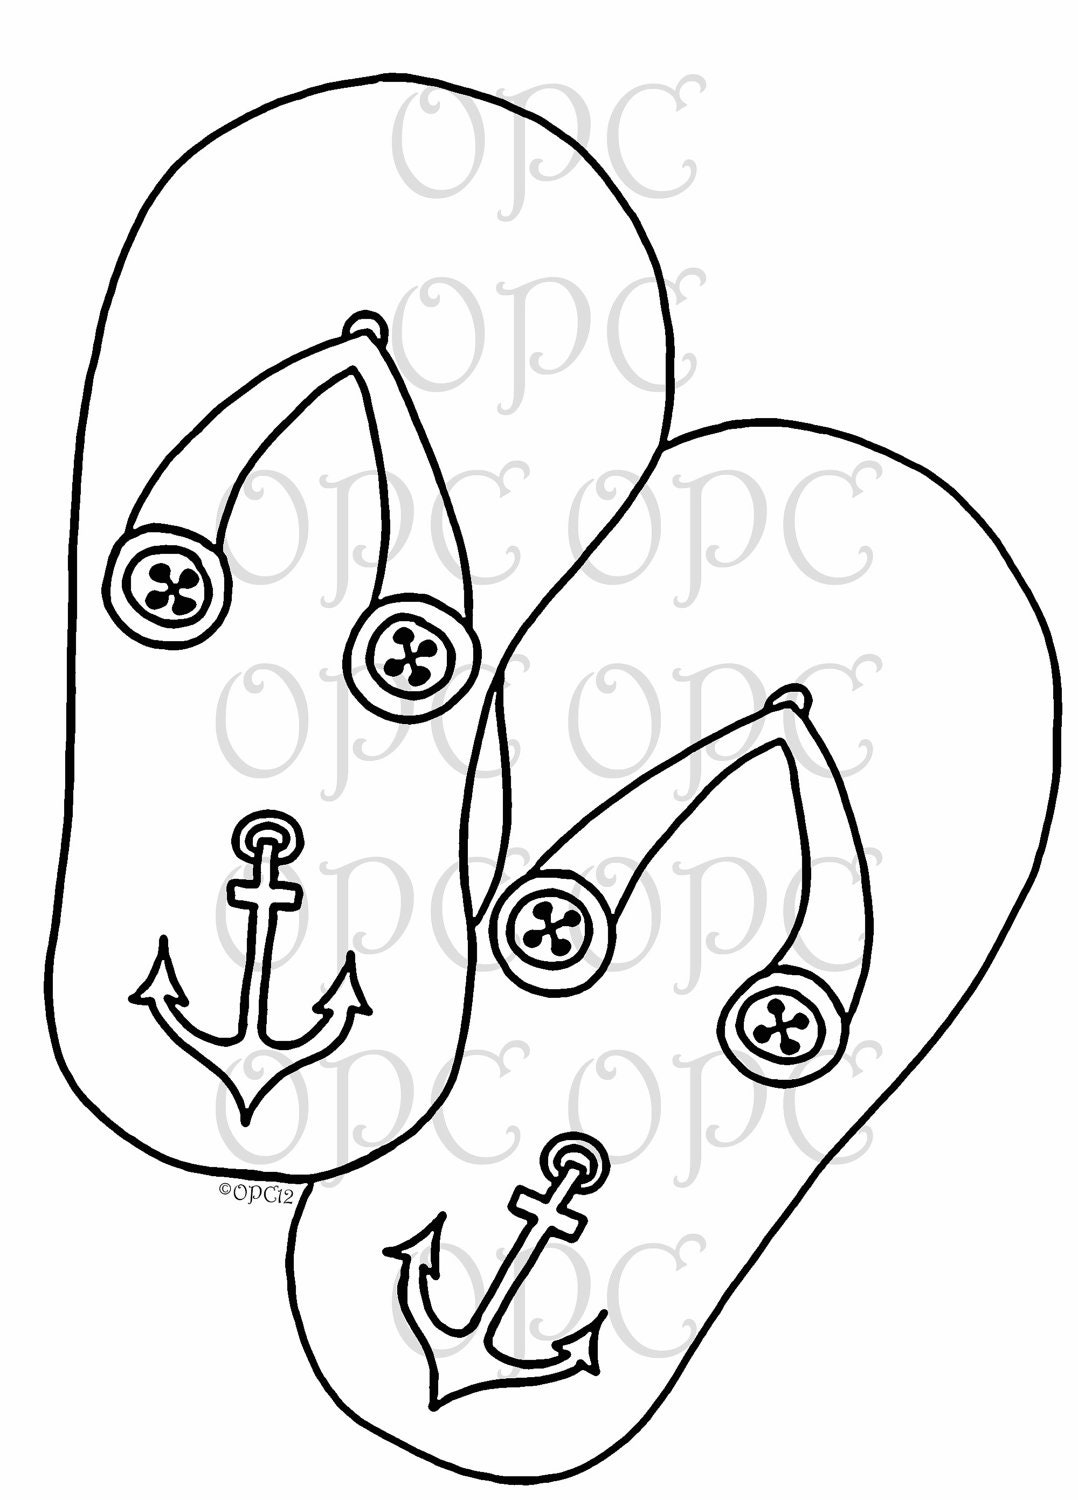 Download Flip Flop Pages Printable Coloring Pages